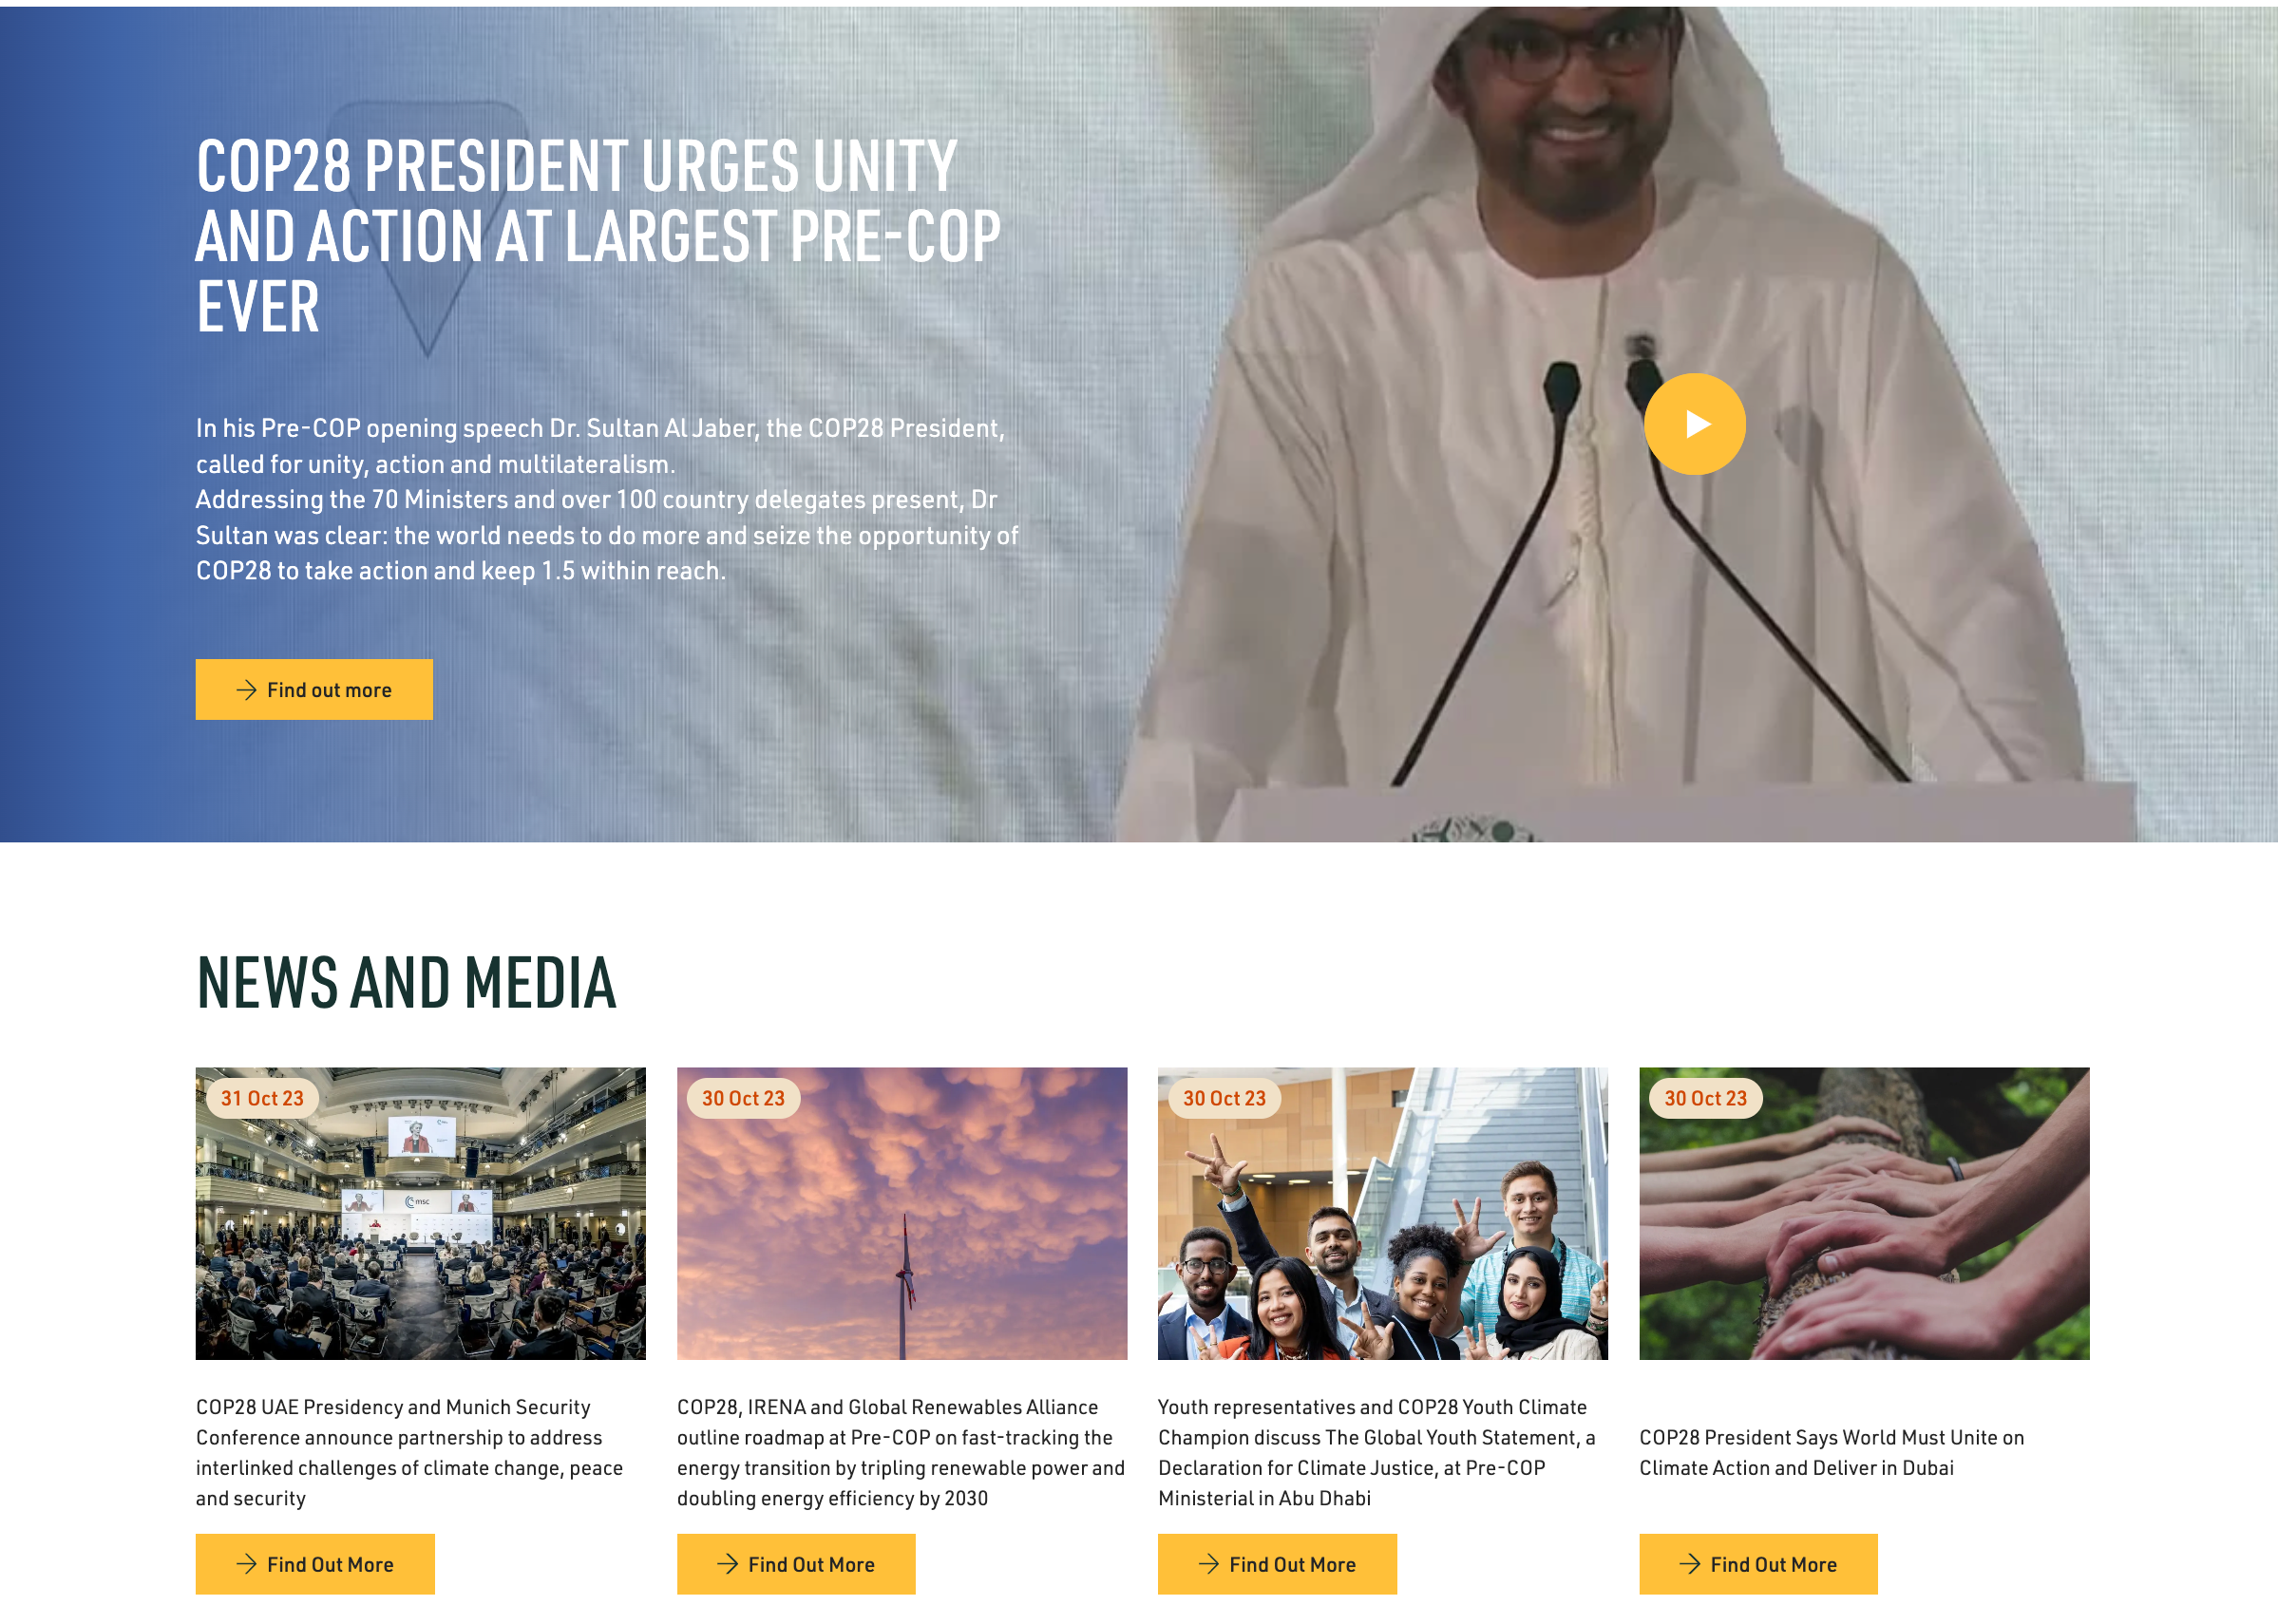 A screenshot of part of the COP28 homepage showing the 